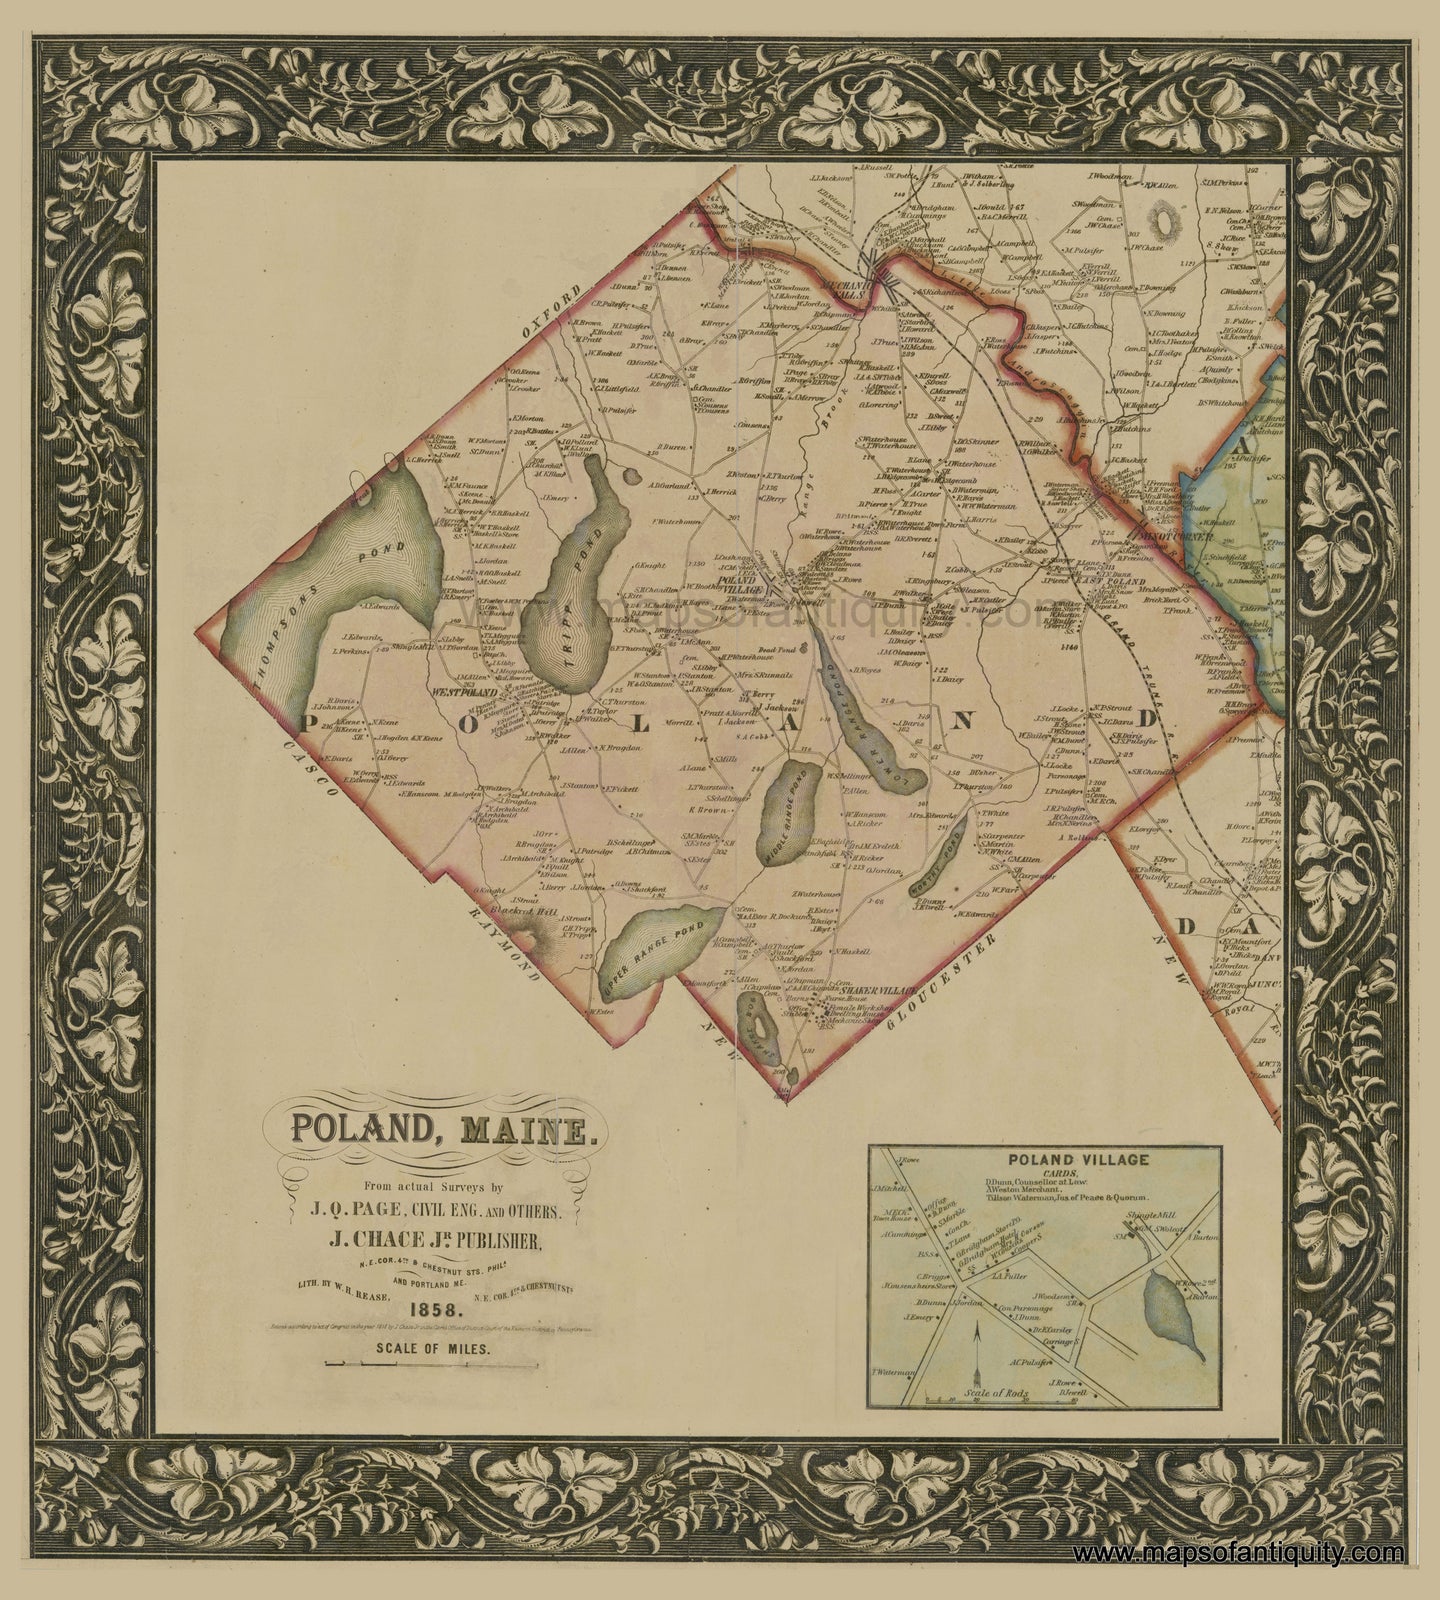 Poland, Maine in 1858 - Reproduction